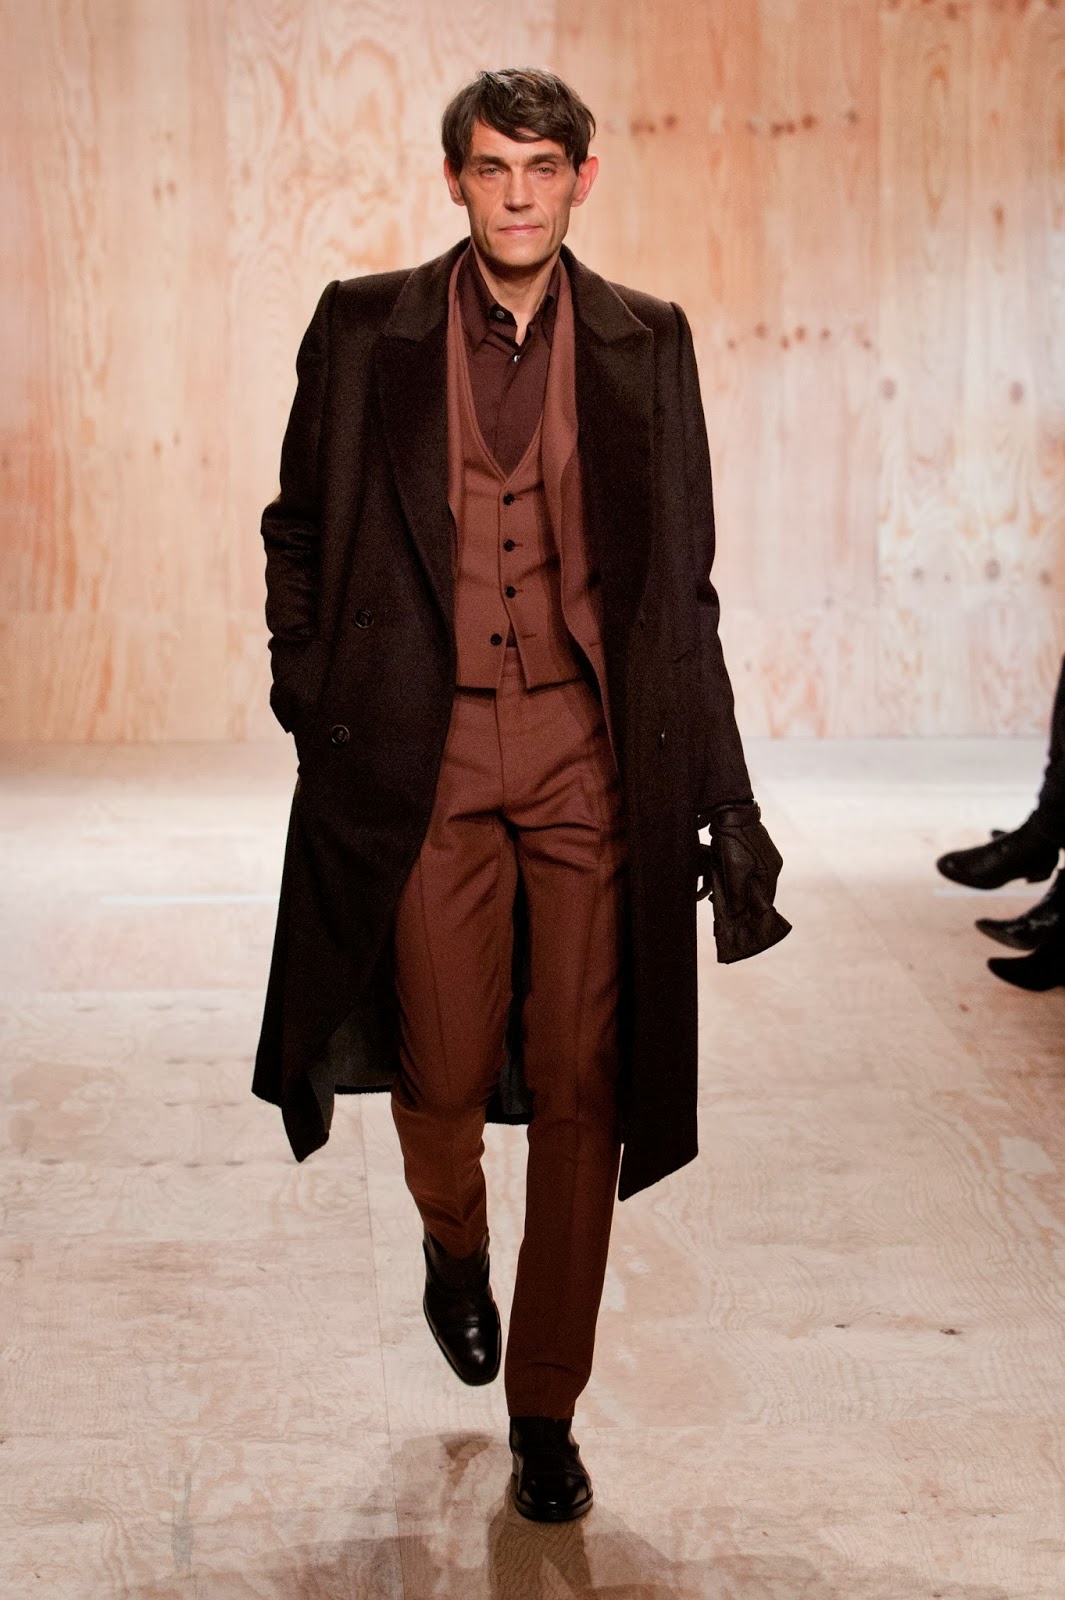 Fashion on the Couch: Berluti Fall/Winter 2014/2015 Runway Show